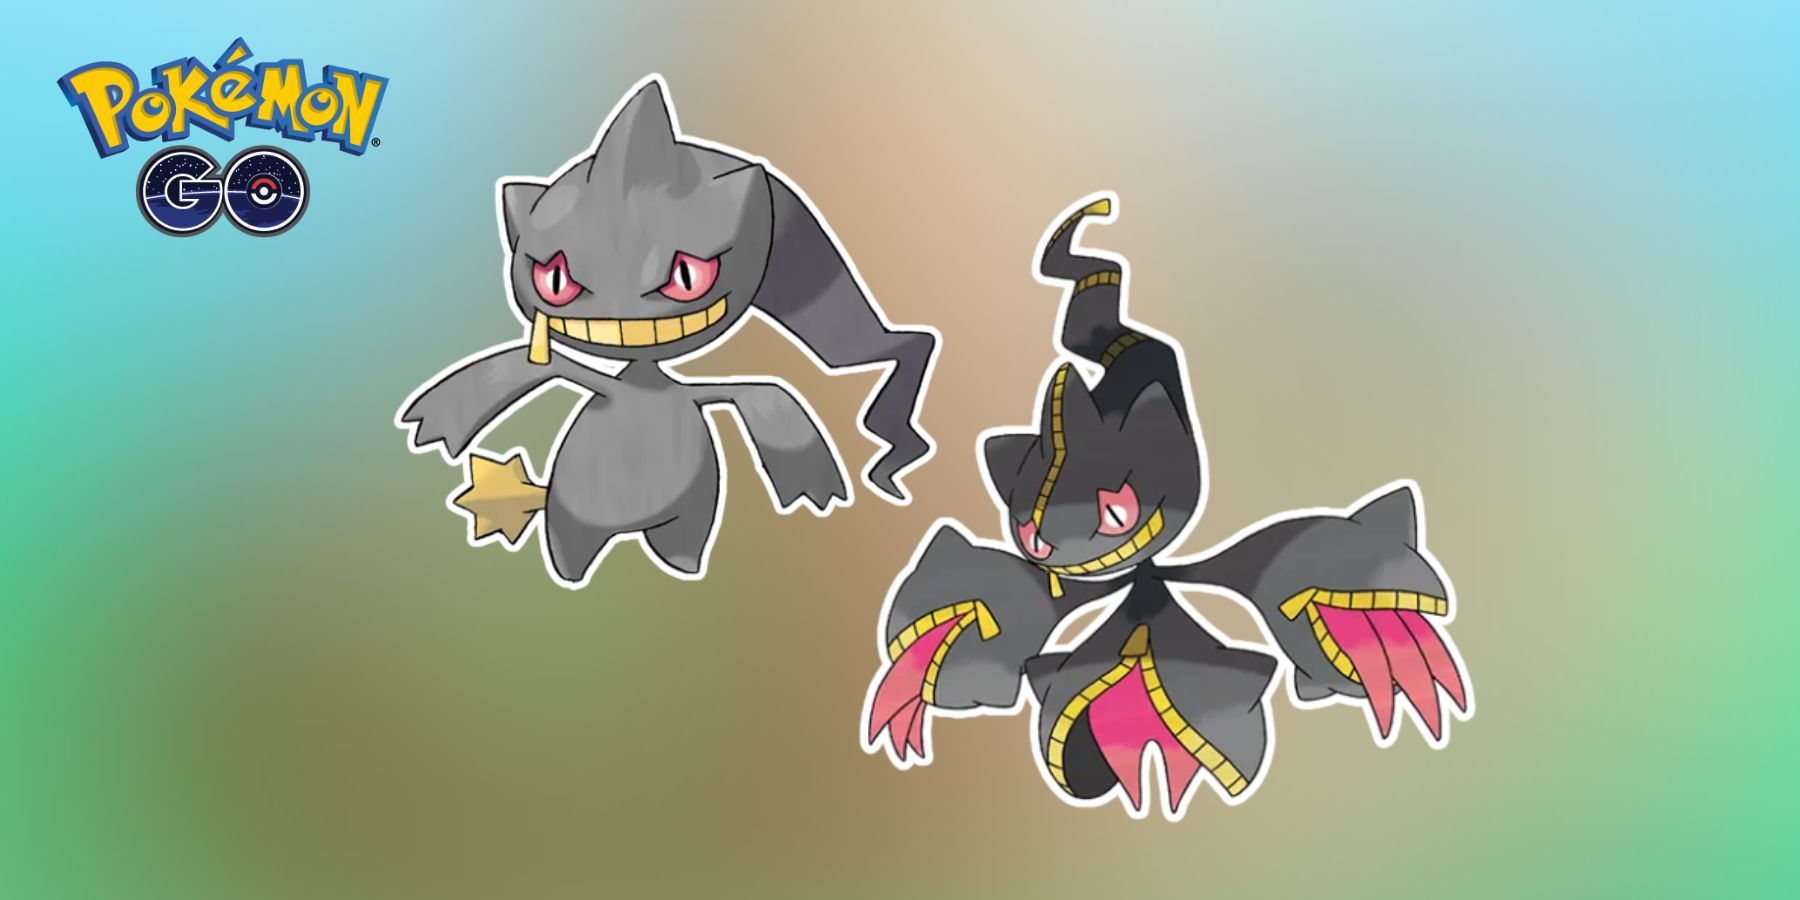 Mega Banette (Pokémon GO) - Best Movesets, Counters, Evolutions and CP